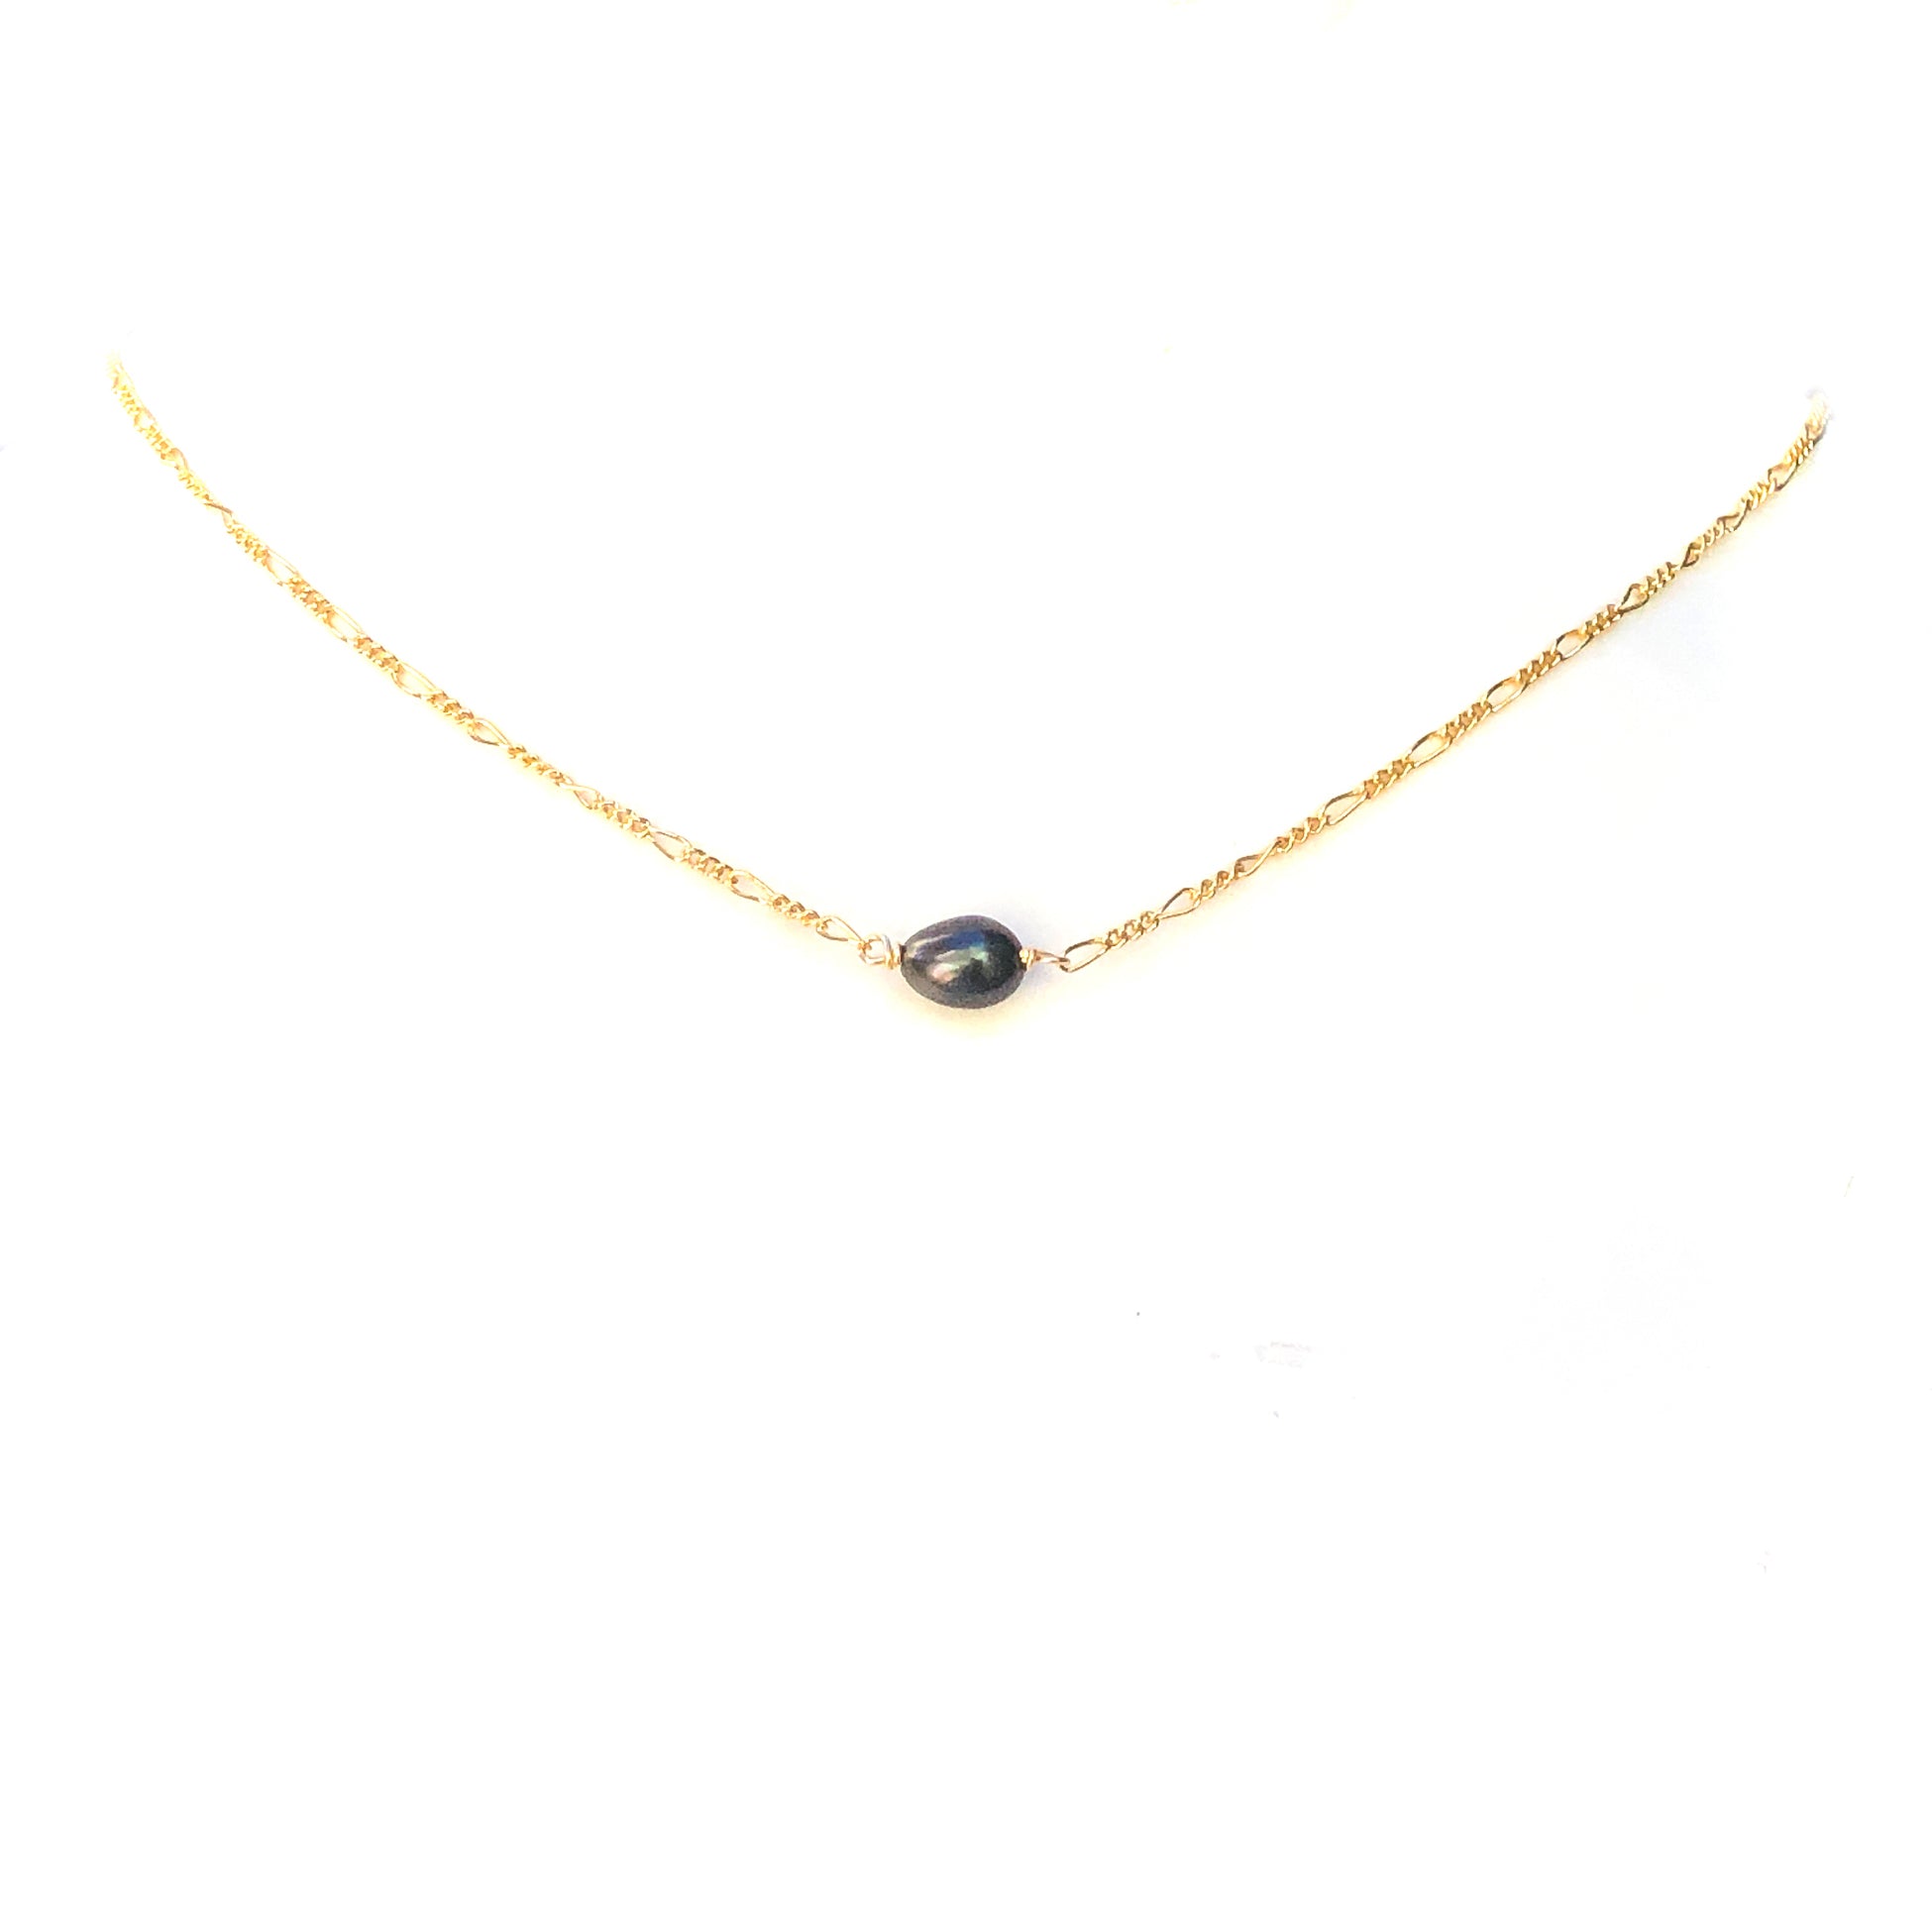 Quality Black Keshi Pearl With Gold Chain